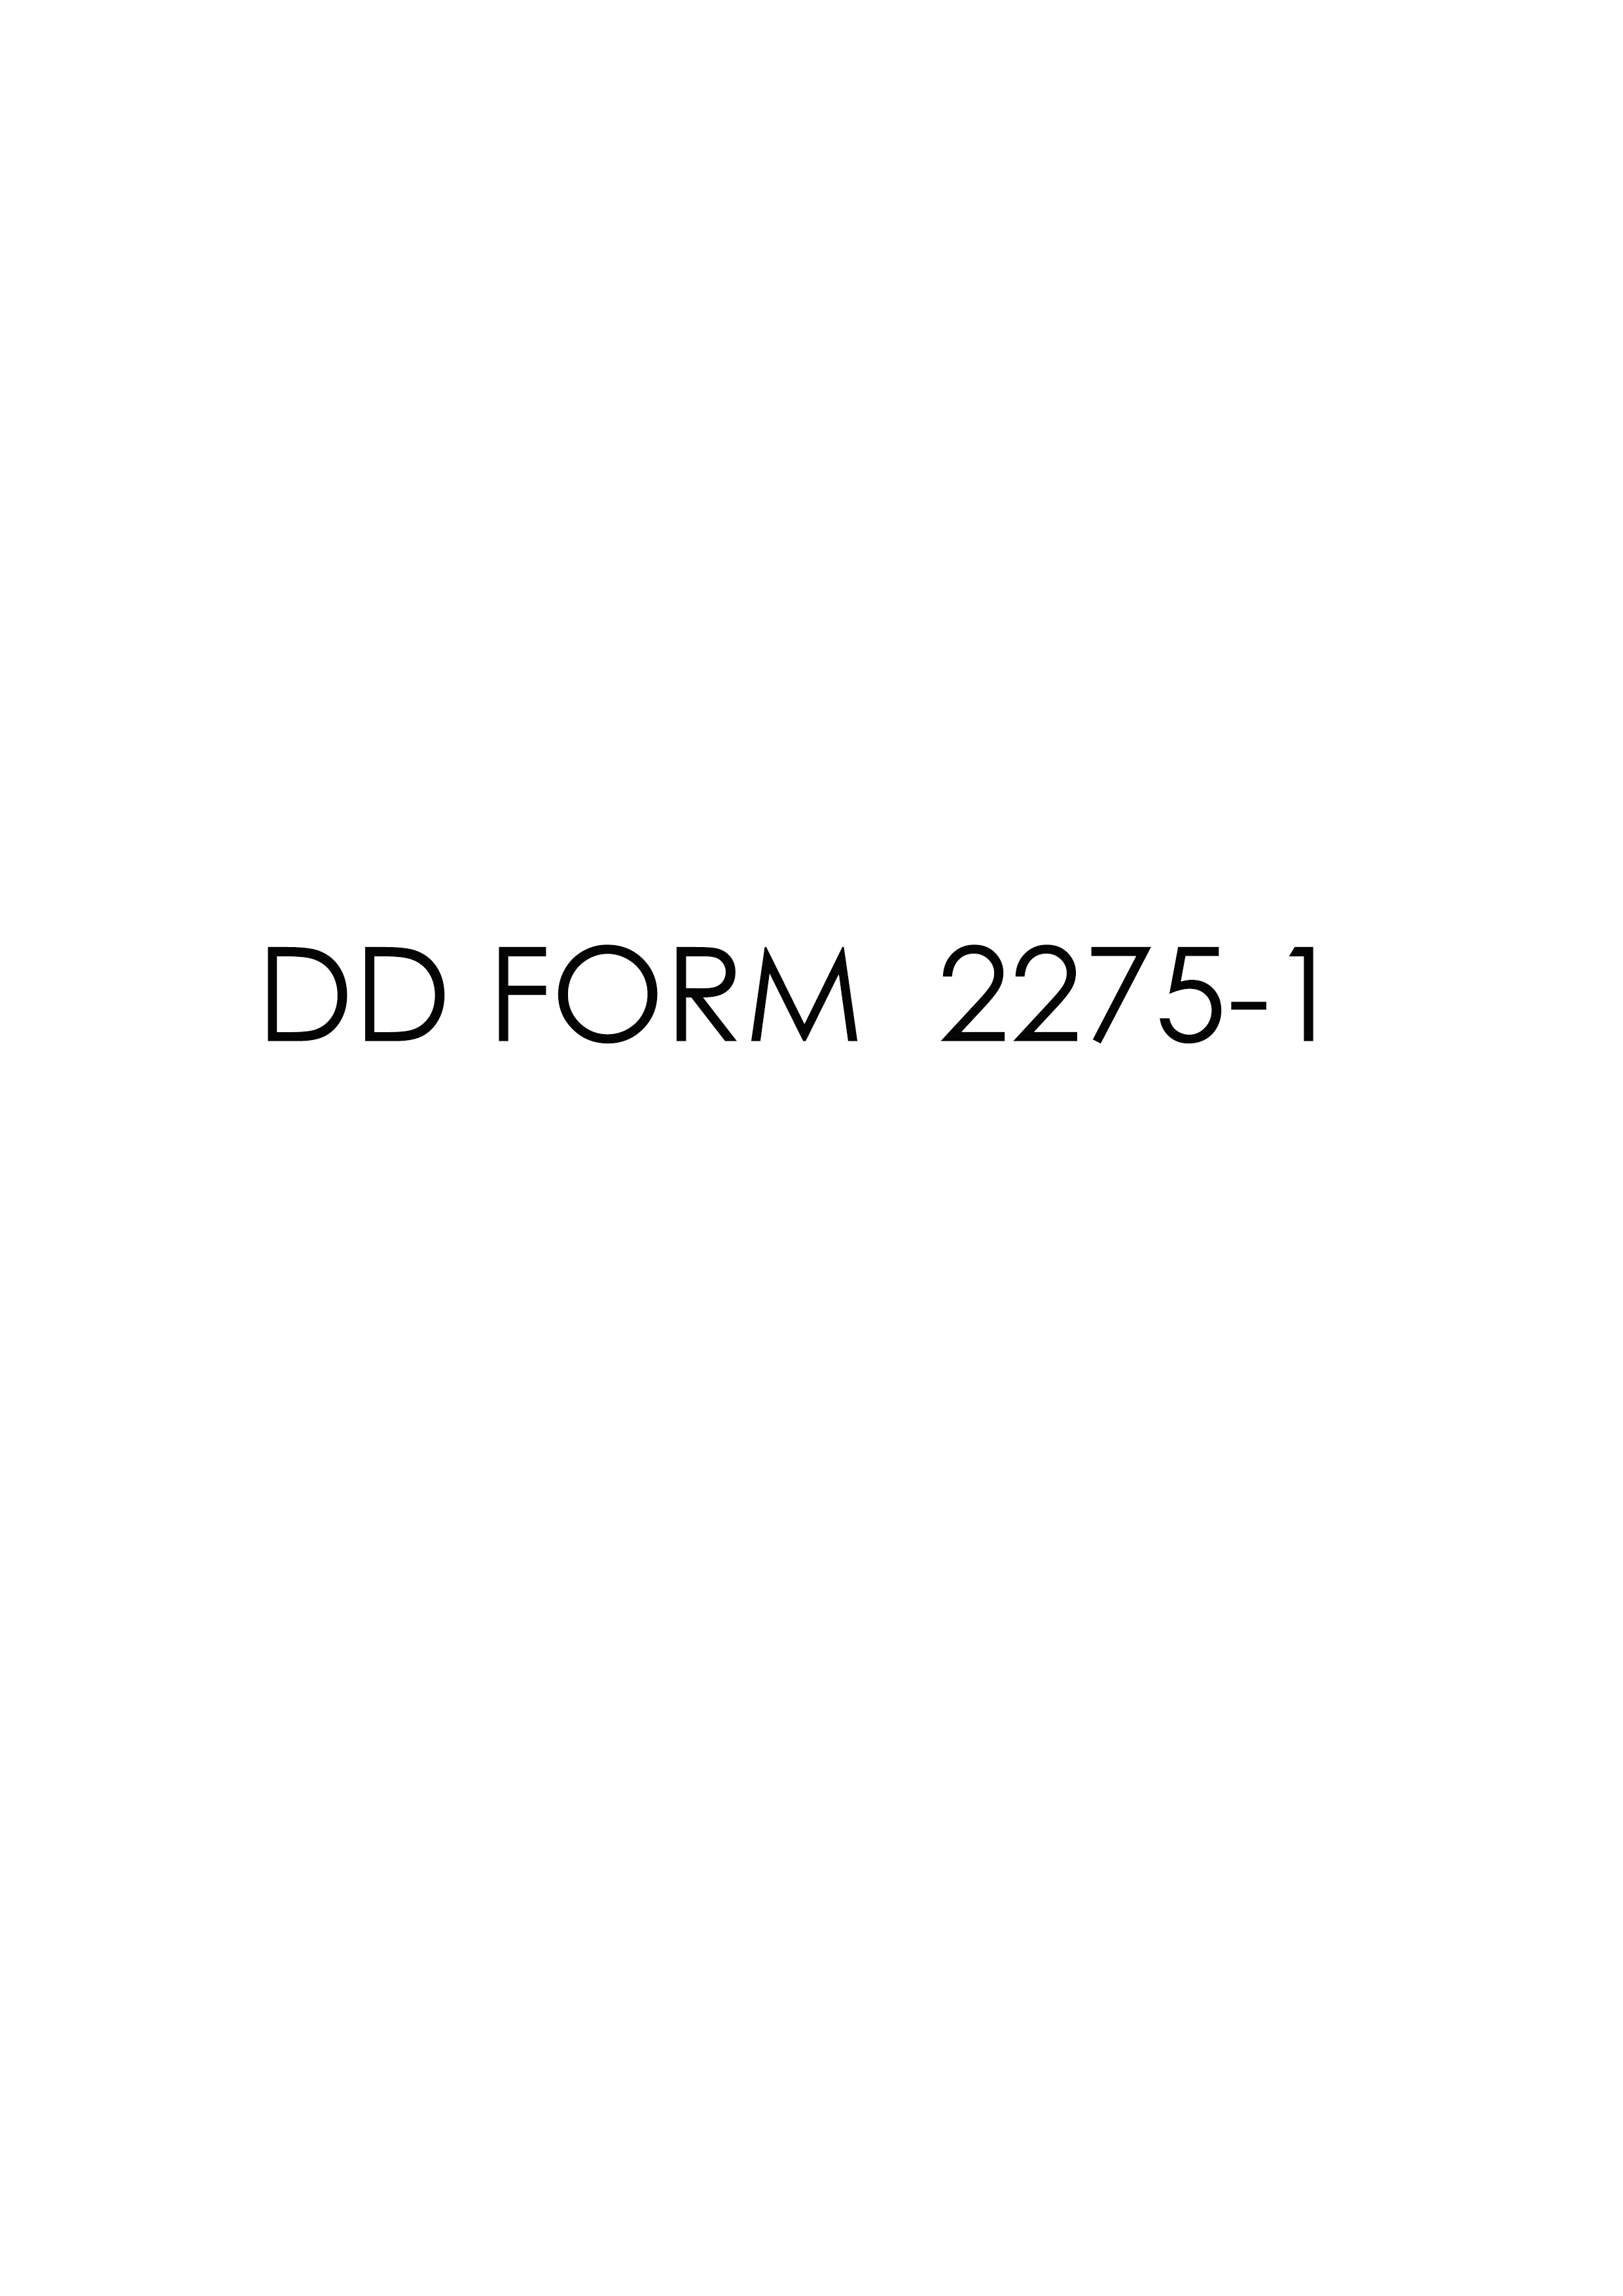 Download Fillable dd Form 2275-1